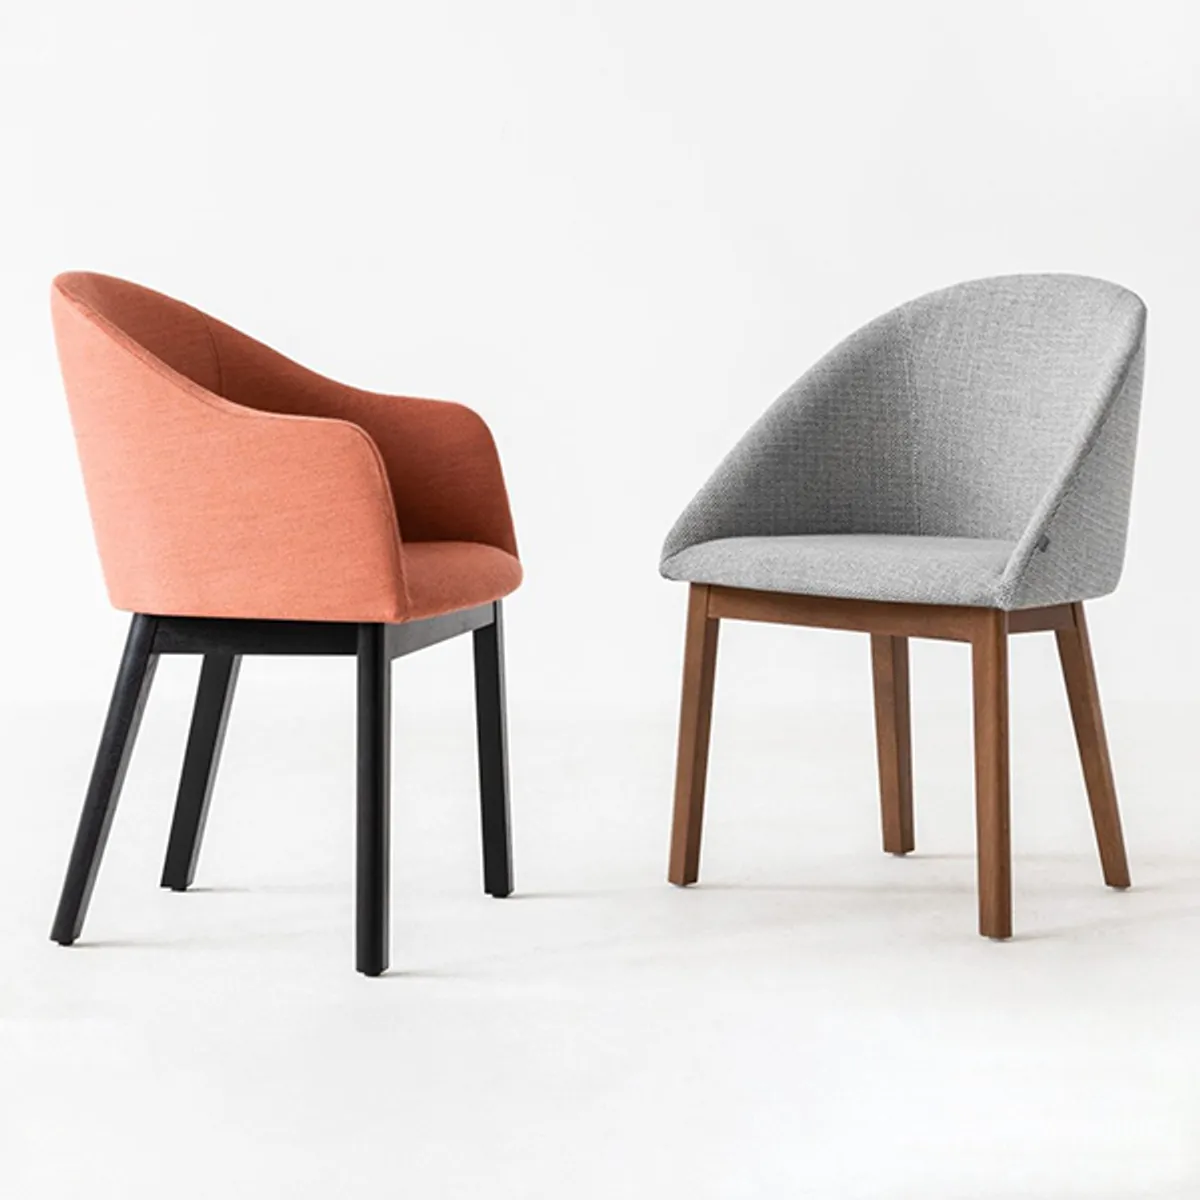 Luca Collection Upholstered Chairs For Commercial Use By Insideoutcontracts 020